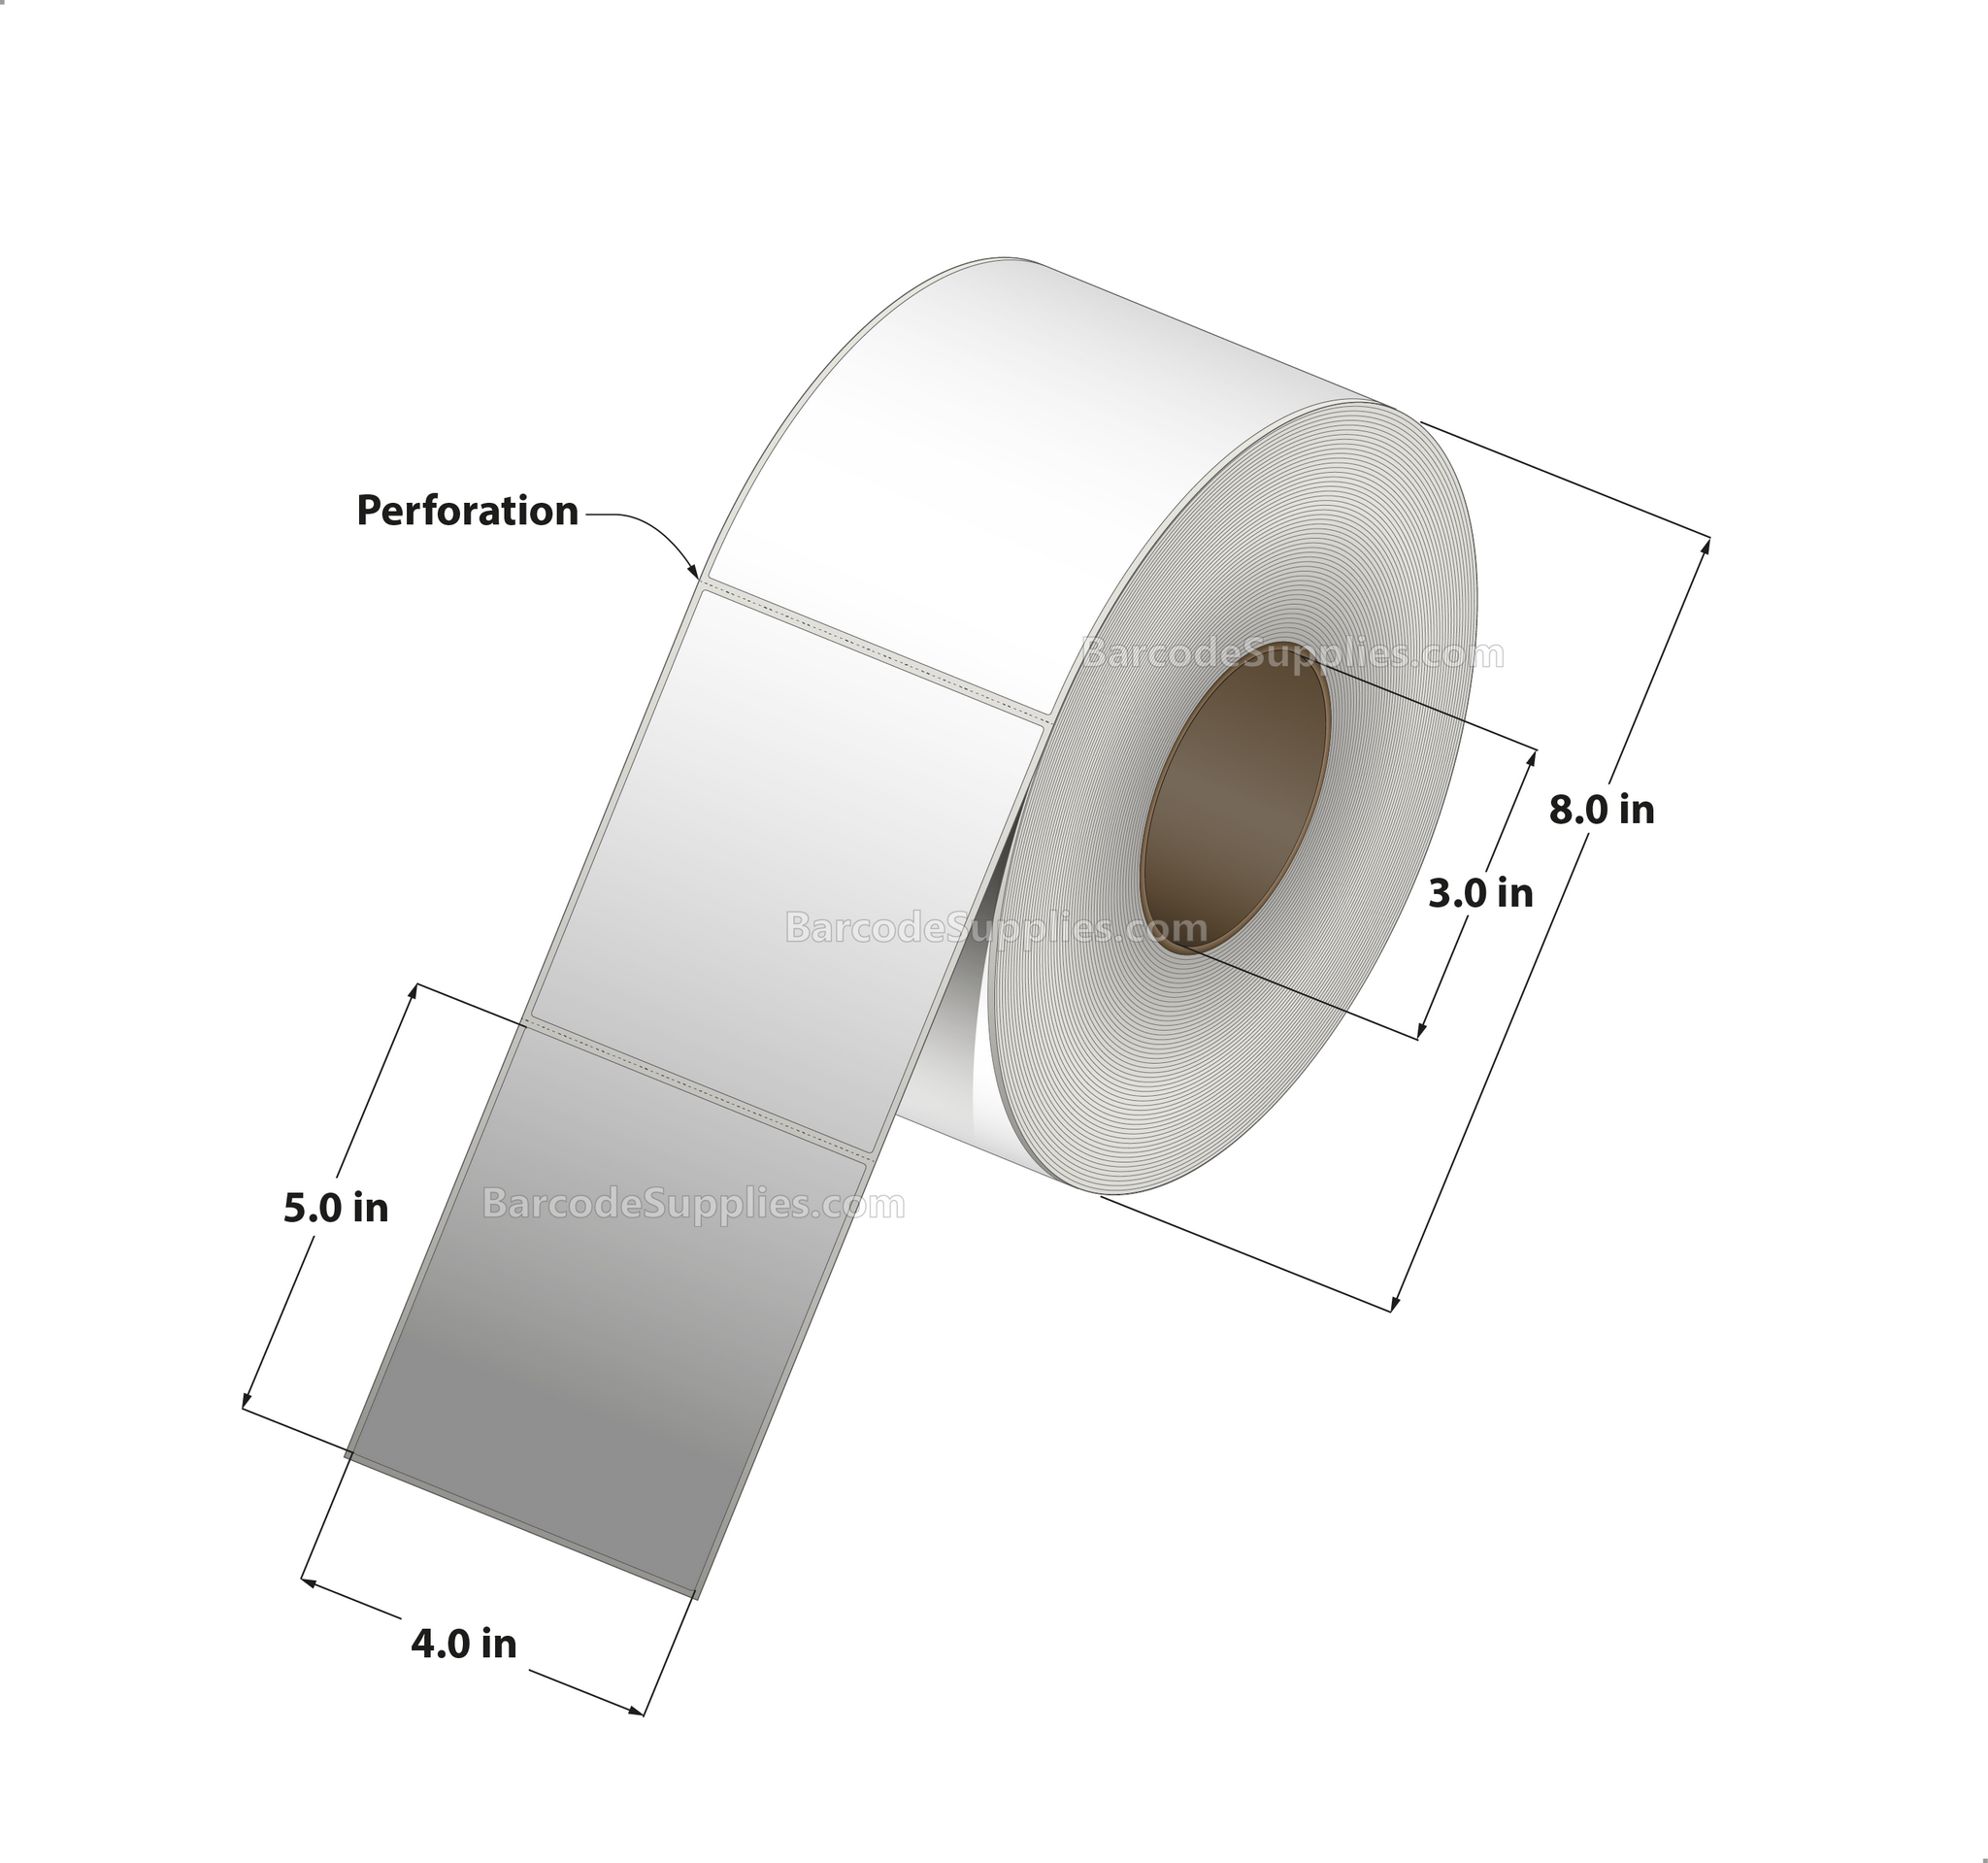 Products 4 x 5 Thermal Transfer White Labels With Permanent Adhesive - Perforated - 1200 Labels Per Roll - Carton Of 4 Rolls - 4800 Labels Total - MPN: RT-4-5-1200-3